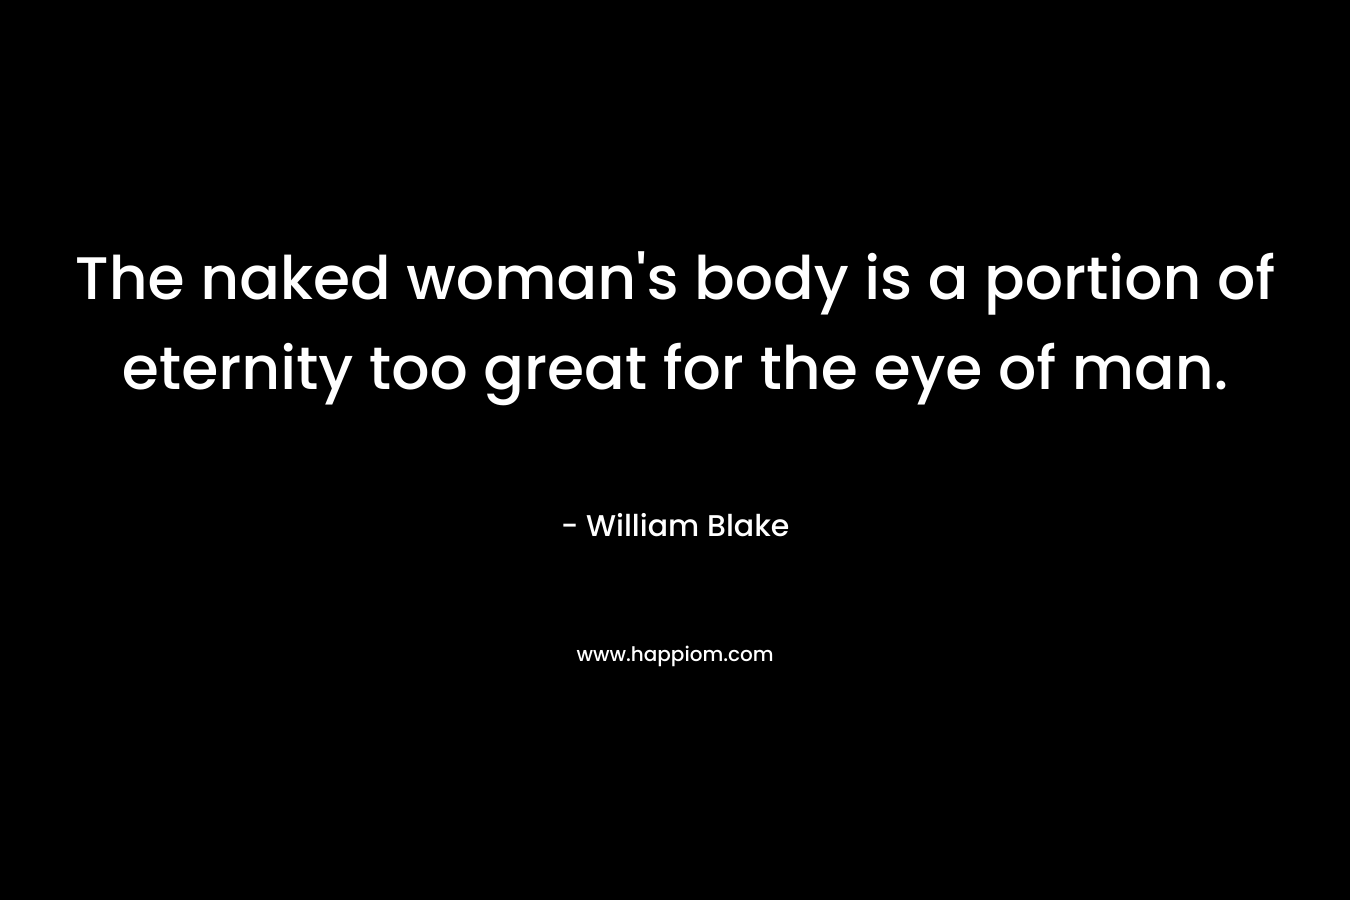 The naked woman’s body is a portion of eternity too great for the eye of man. – William Blake